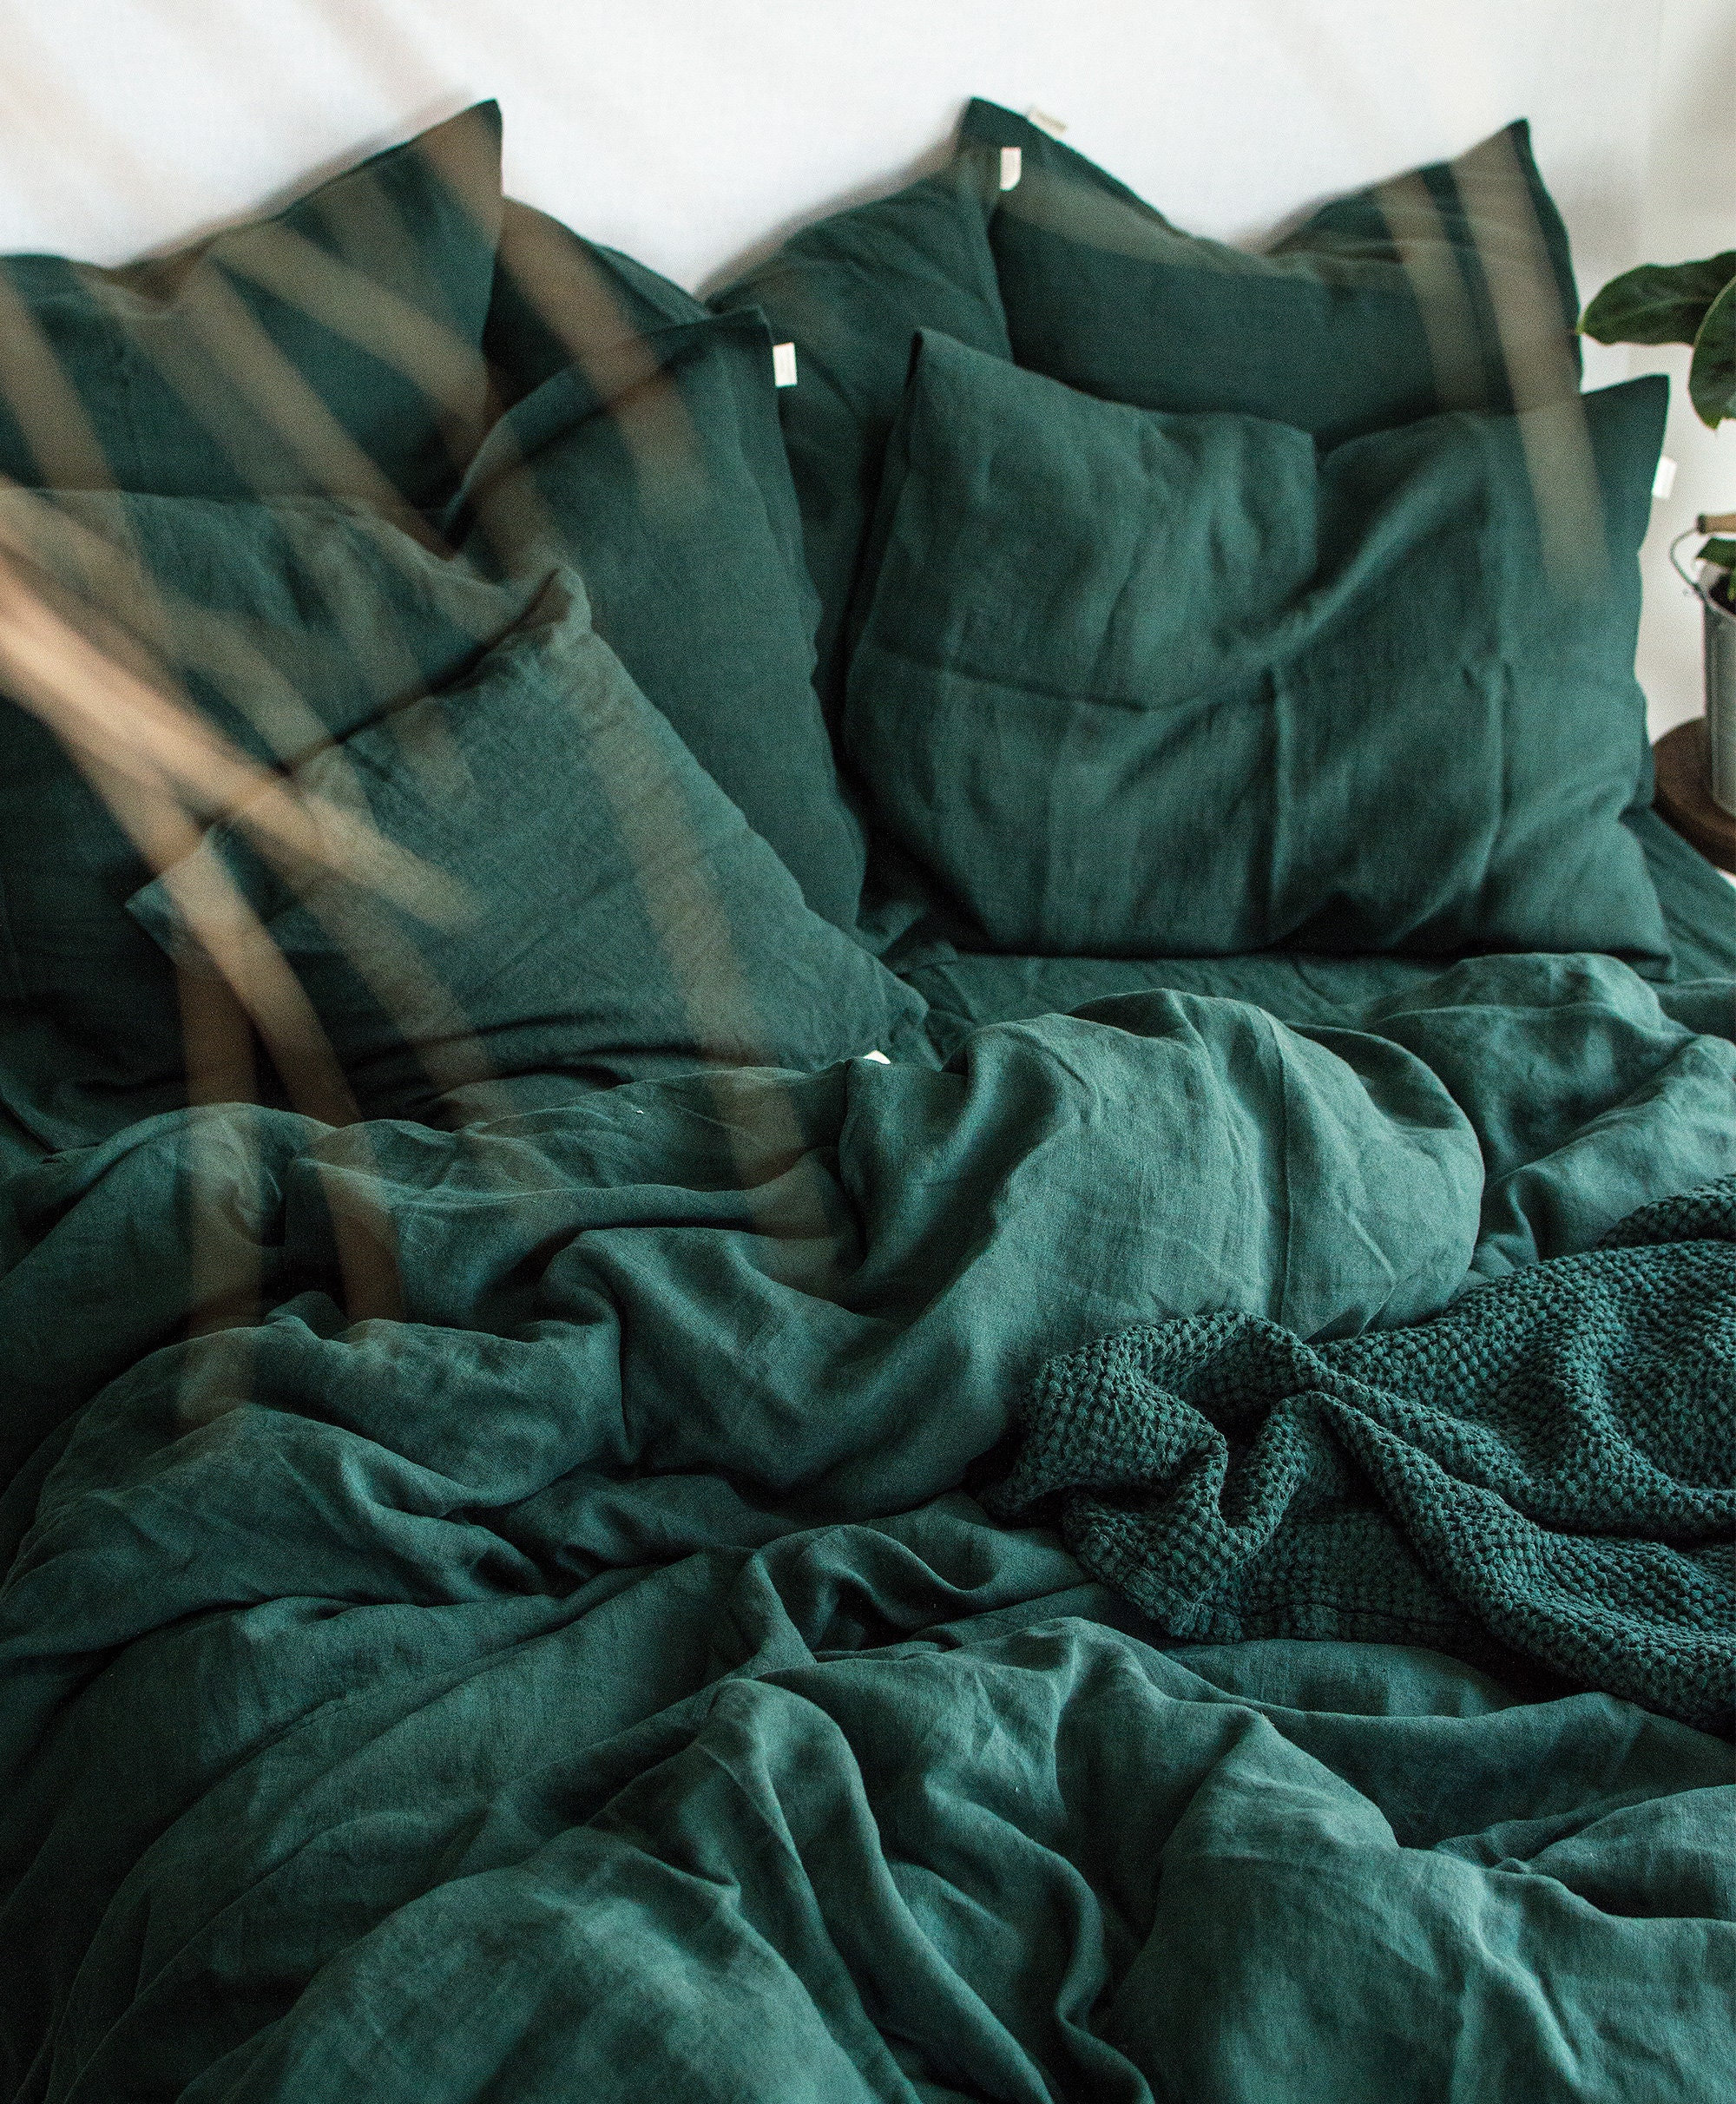 Buy Linen Duvet Cover in Jungle Green. Natural Linen Duvet Cover in Dark  Green. King, Queen, Twin, Full, Double Sizes. Green Linen Bedding Online in  India 